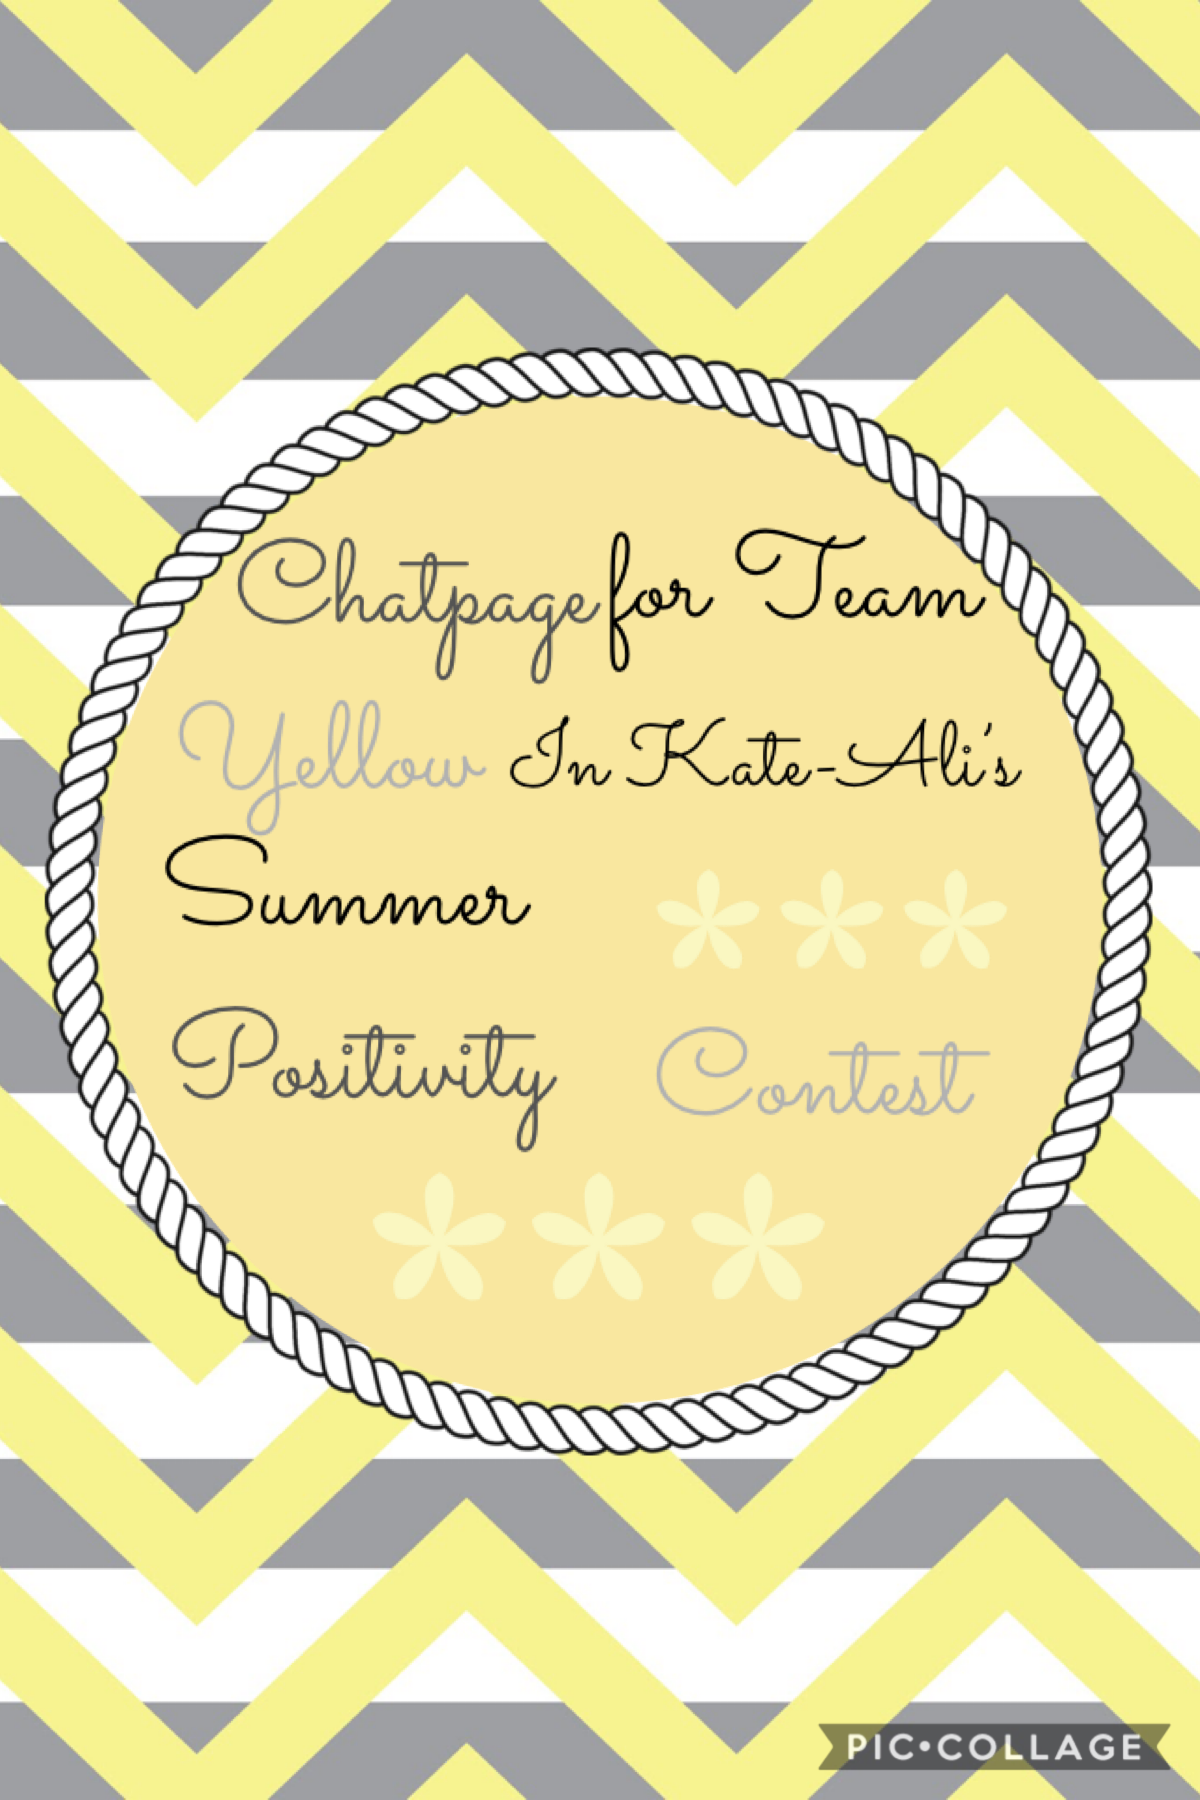 Team Yellow in Kate-Ali’s Summer Positivity Contest